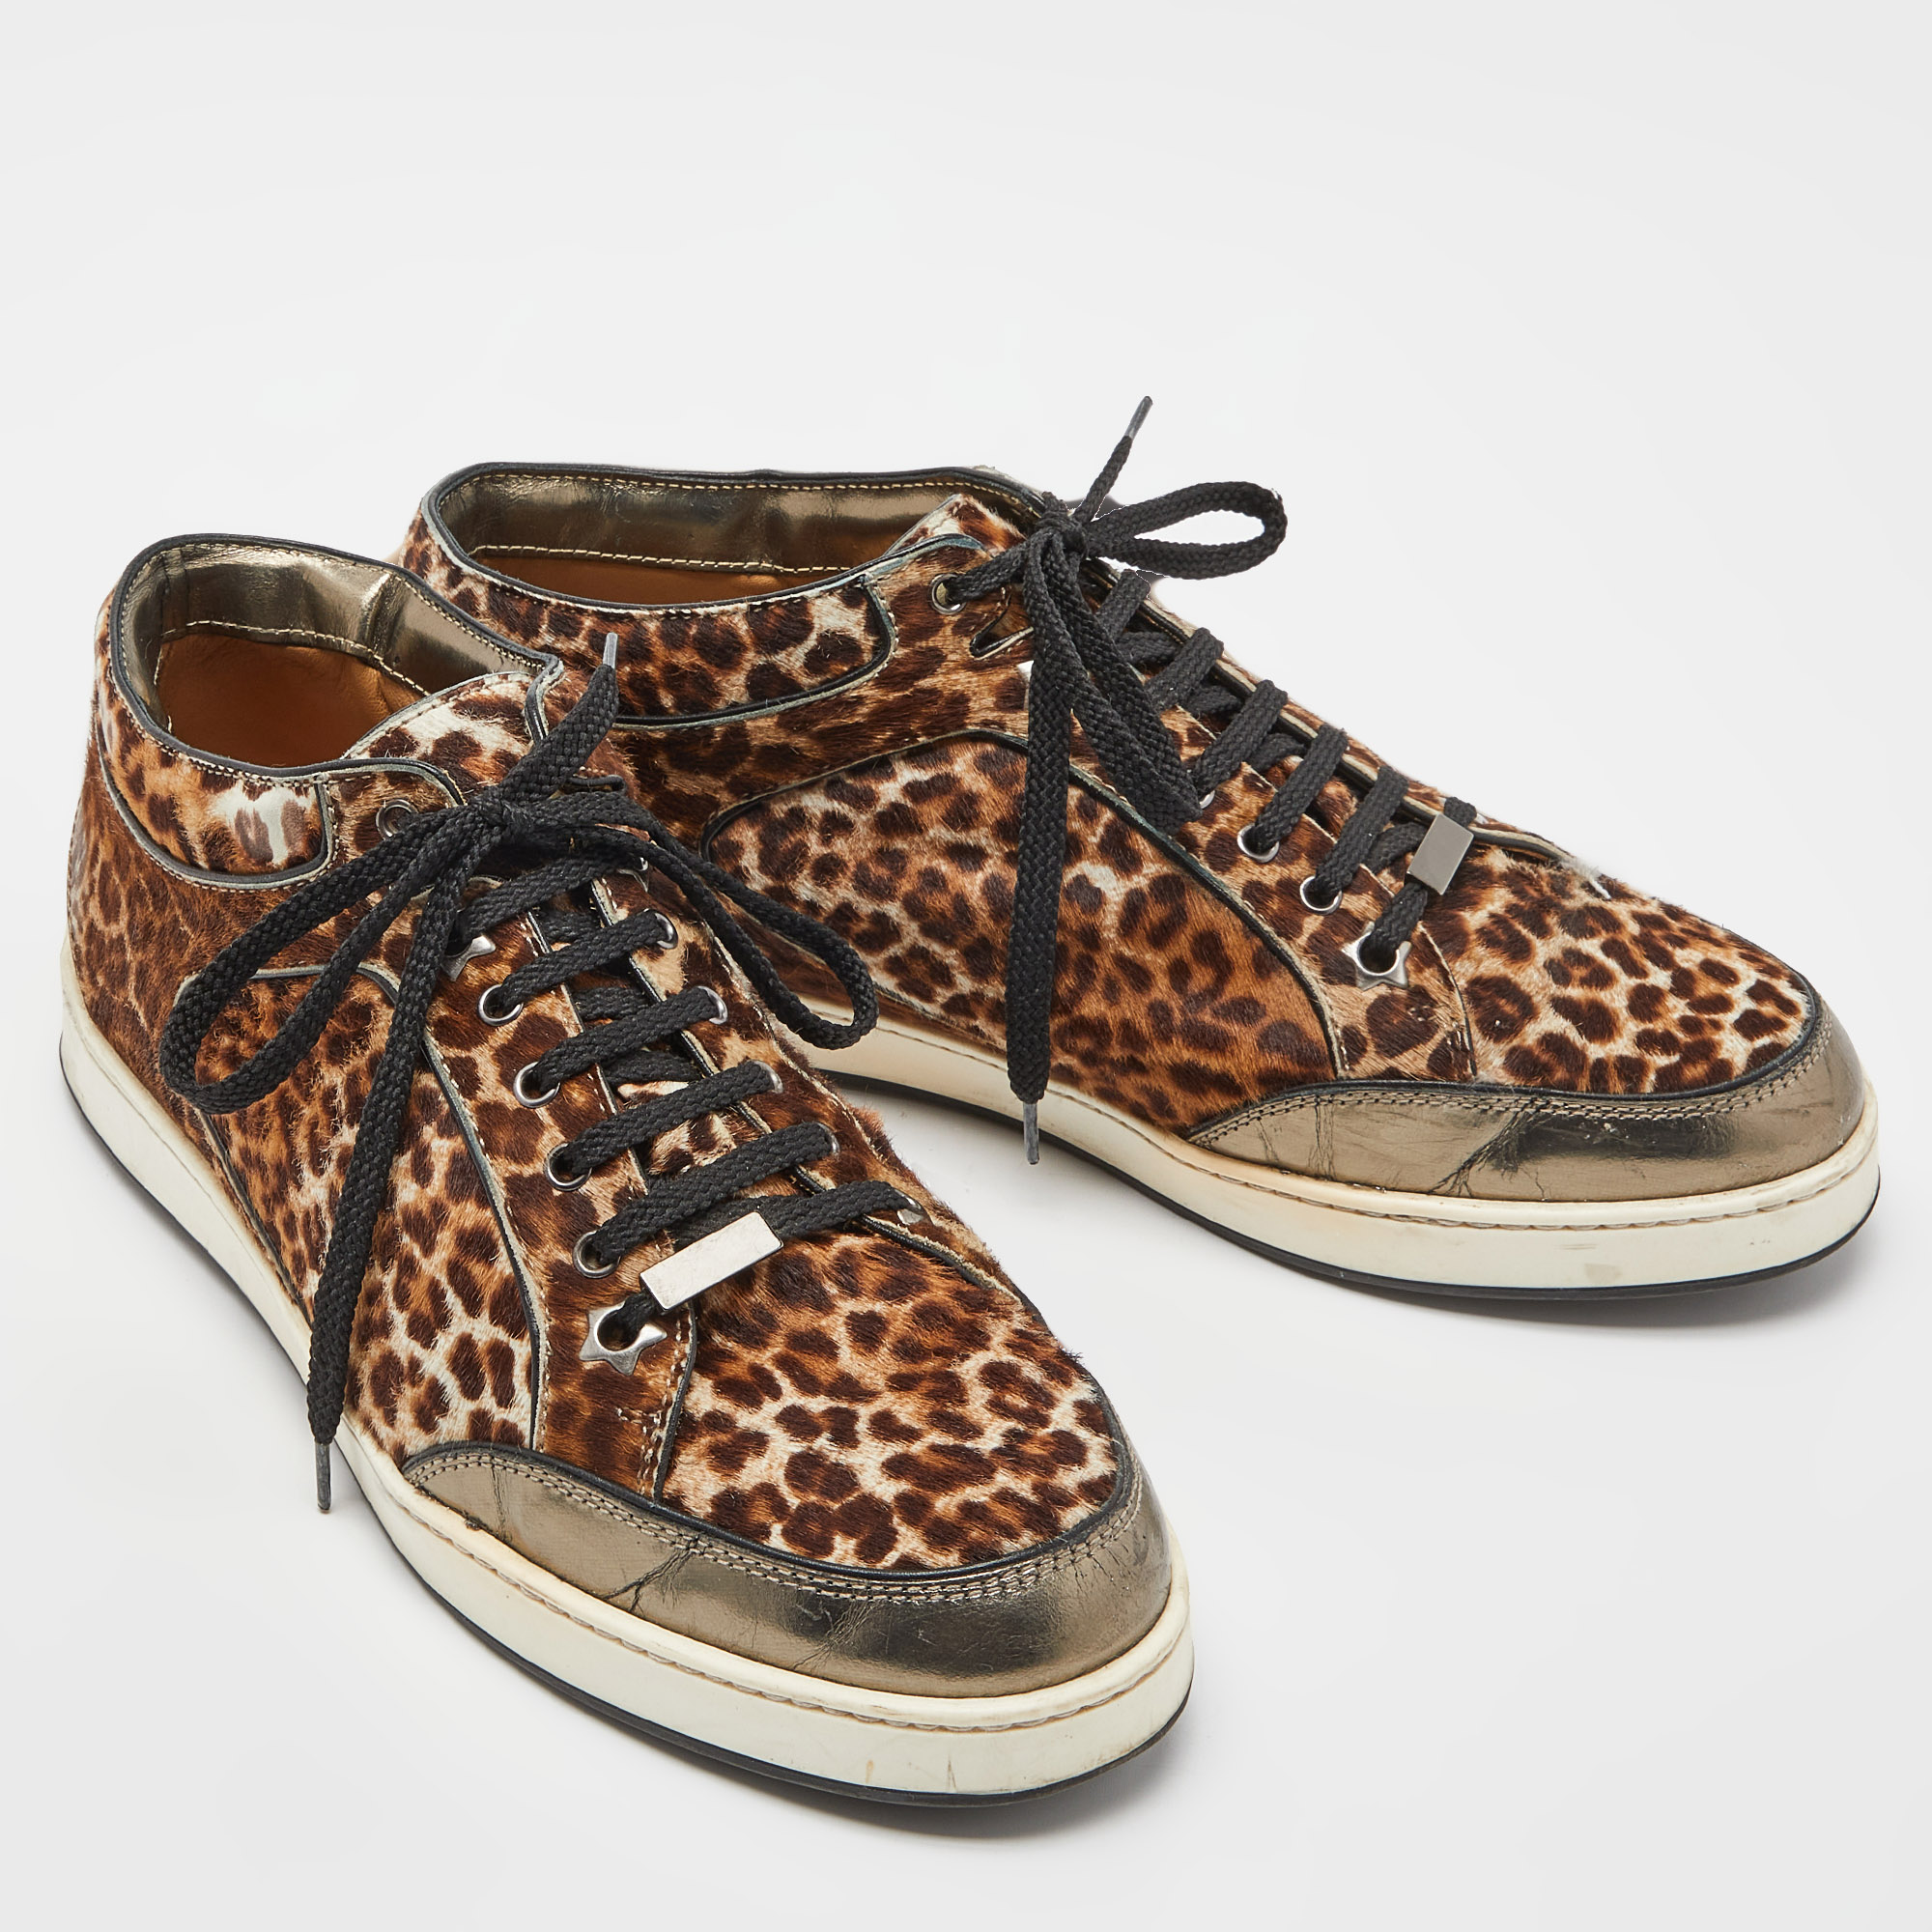 Jimmy Choo Brown/Metallic Leopard Print Calfhair And Mirrored Leather Miami Low Top Sneakers Size 38.5